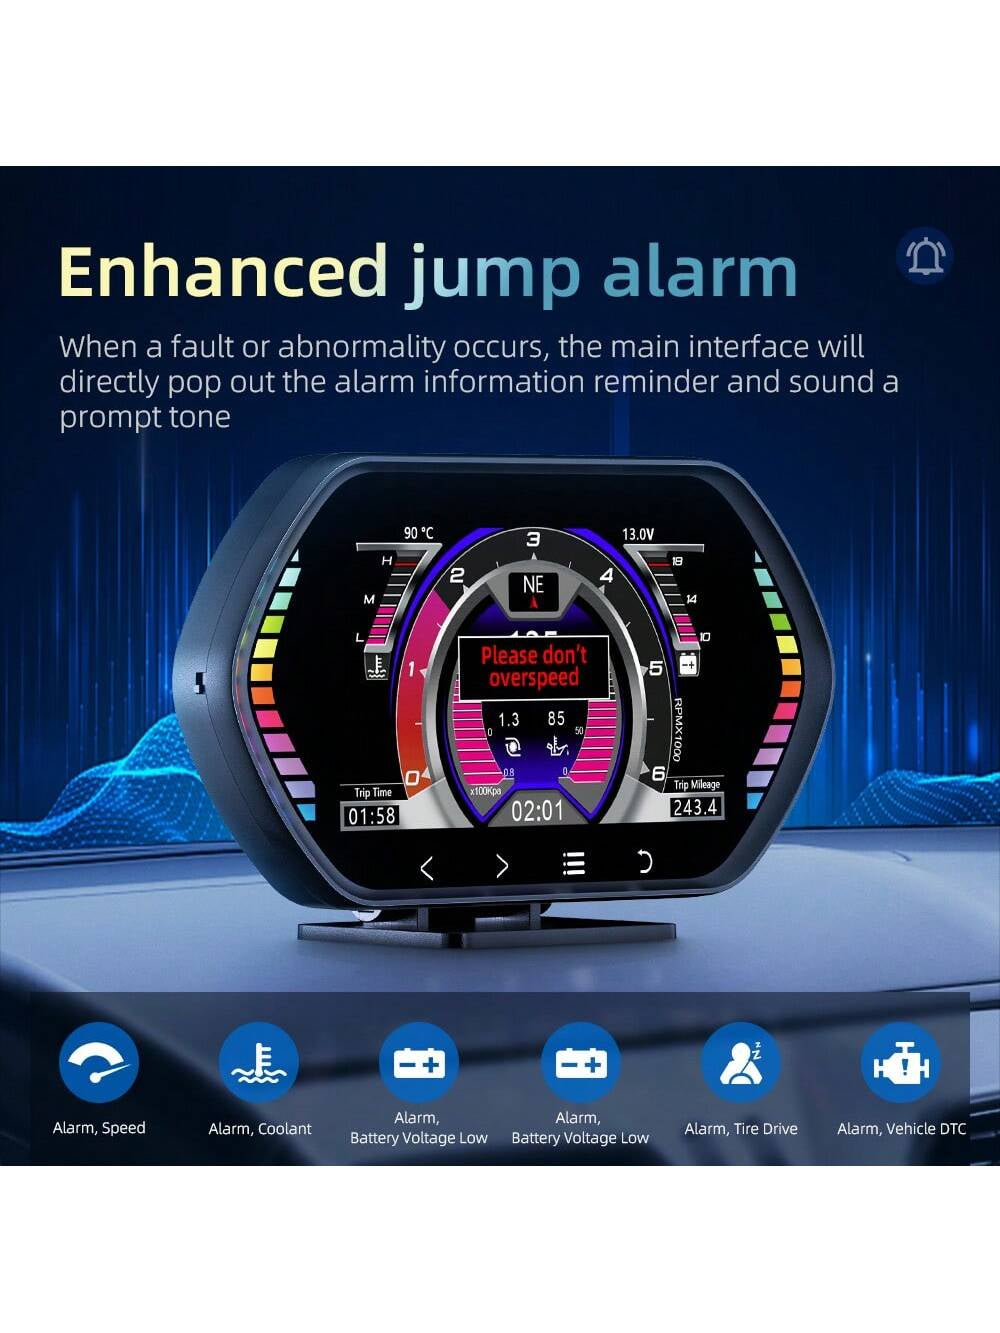 Professional title: "Advanced OBD2 Multi-Data Monitor with Head-Up Display - Accurate and Fast Response - Plug and Play HUD - Digital OBDII Speedometer for Cars 2008 and After (F12)"